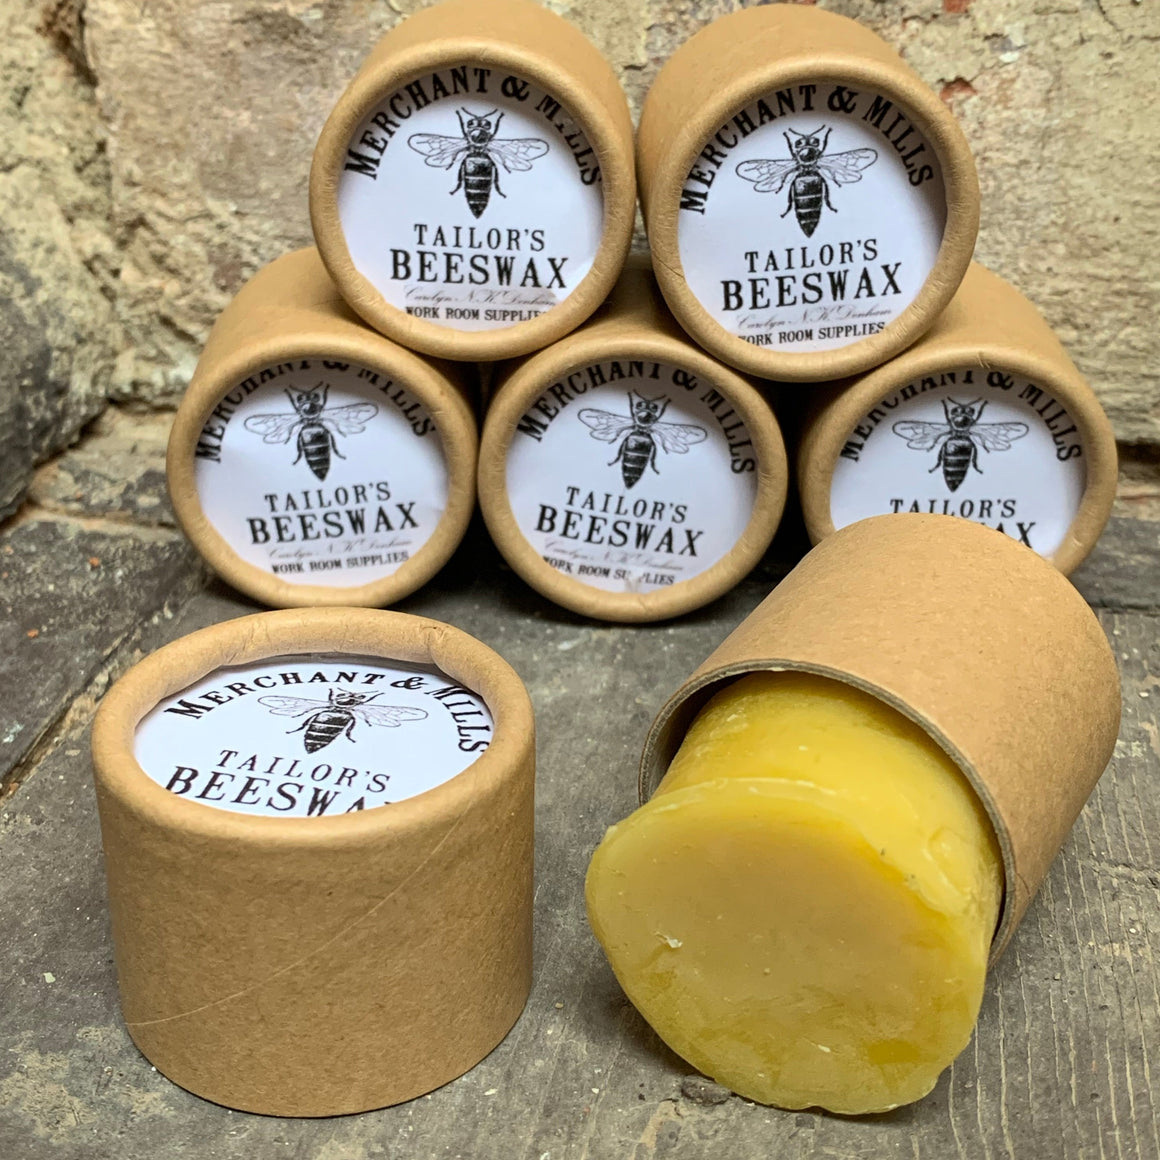 Tailor's Beeswax from Merchant & Mills